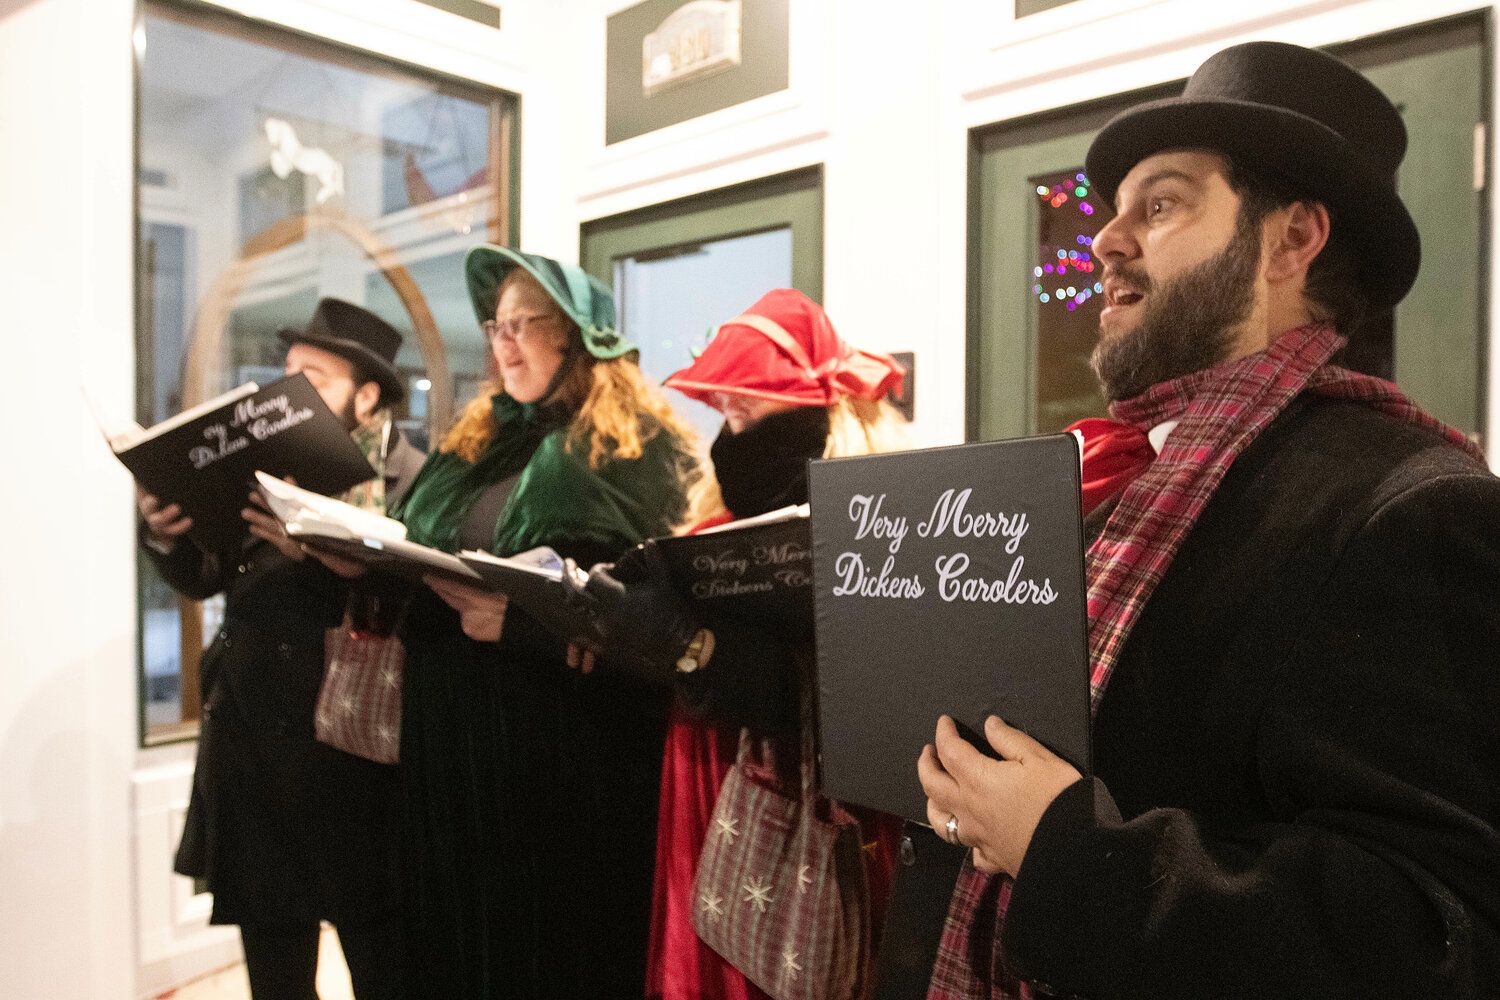 The Very Merry Dickens Carolers sing under an awning on Main Street.